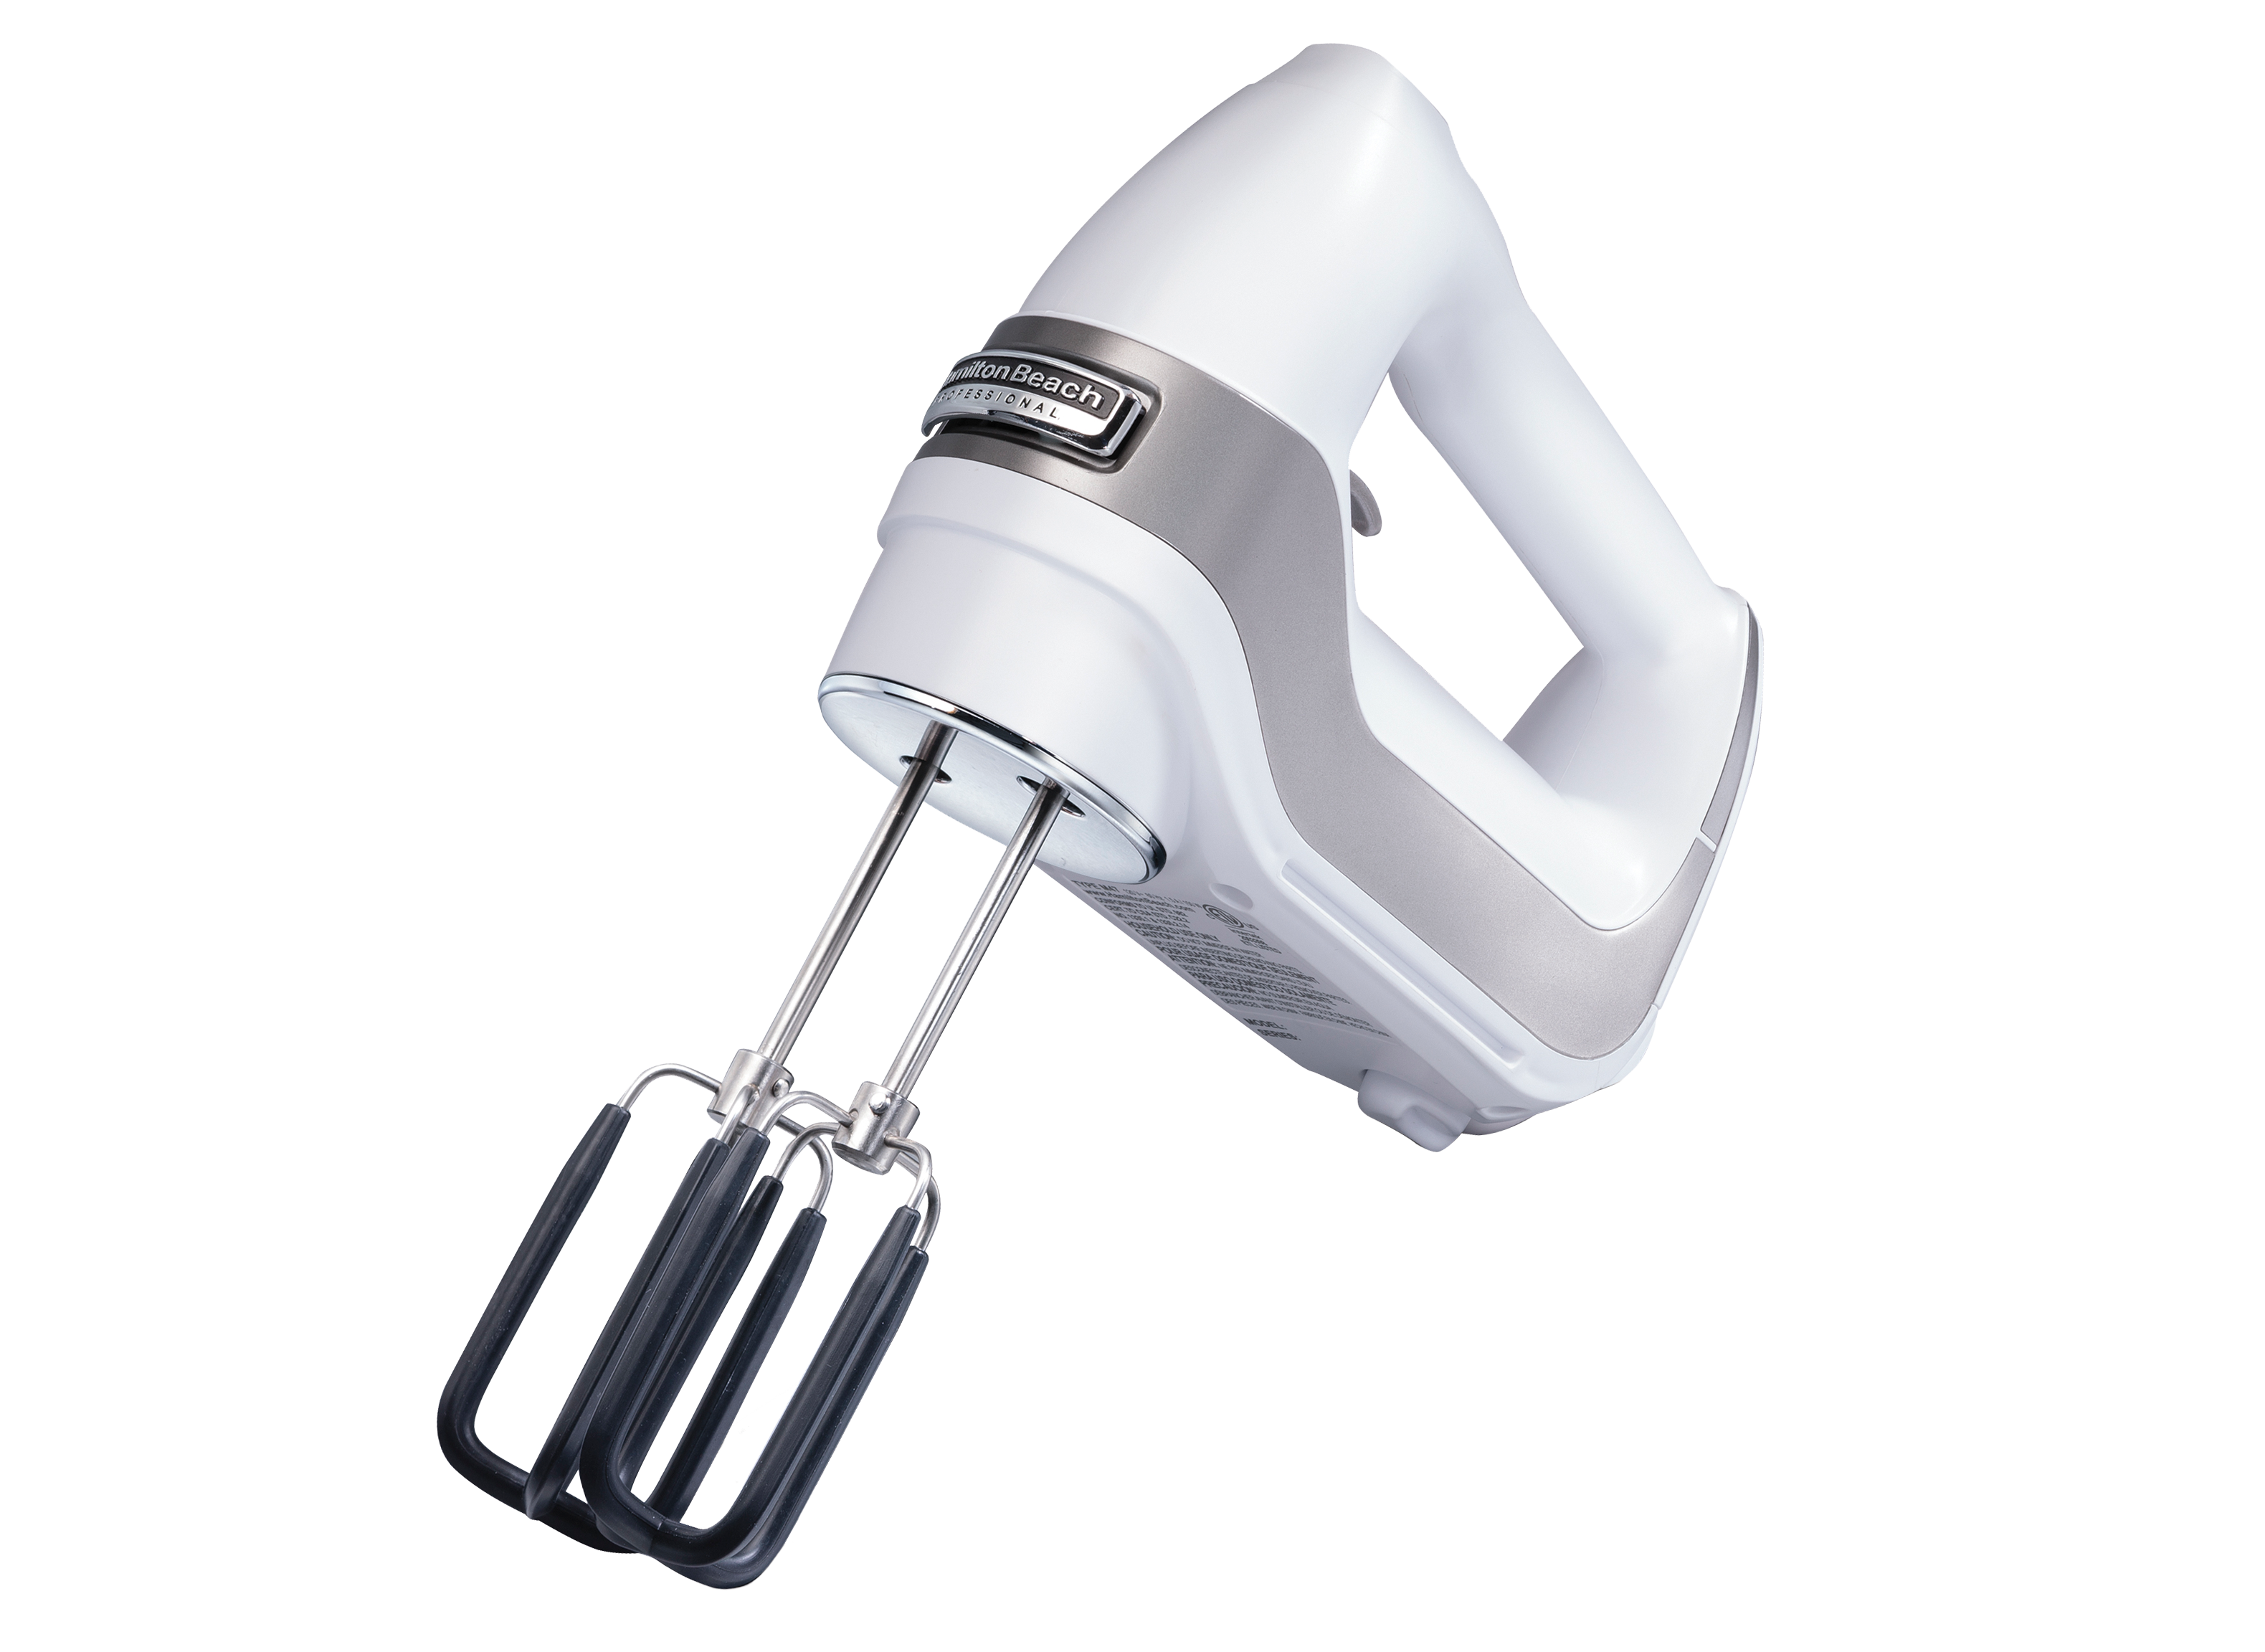 Hamilton Beach Professional 5 Speed Hand Mixer with Easy Clean